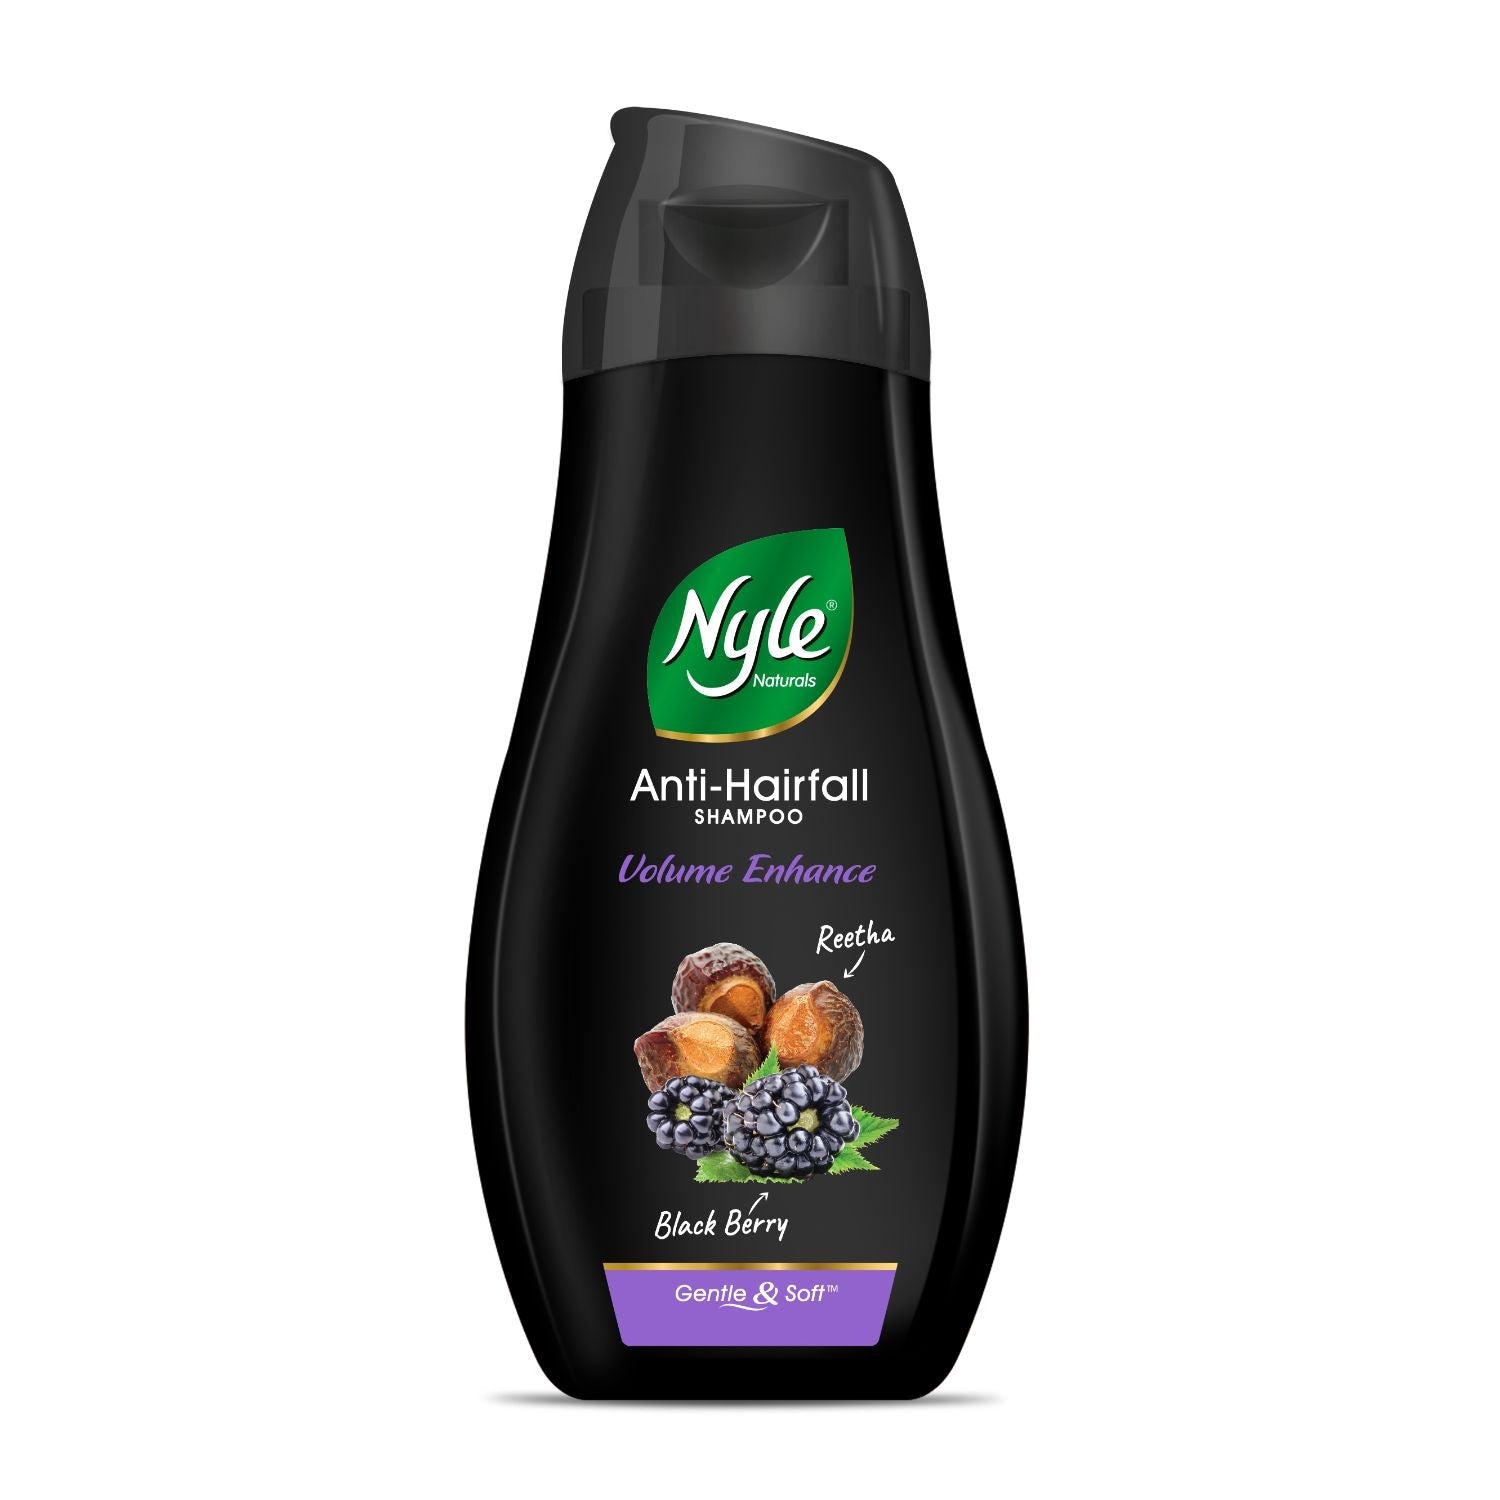 Nyle Naturals Volume Enhance Anti Hairfall Shampoo, With Reetha And Blackberry, Gentle and soft shampoo , PH balanced and Paraben free, For Men and Women - 90 ml